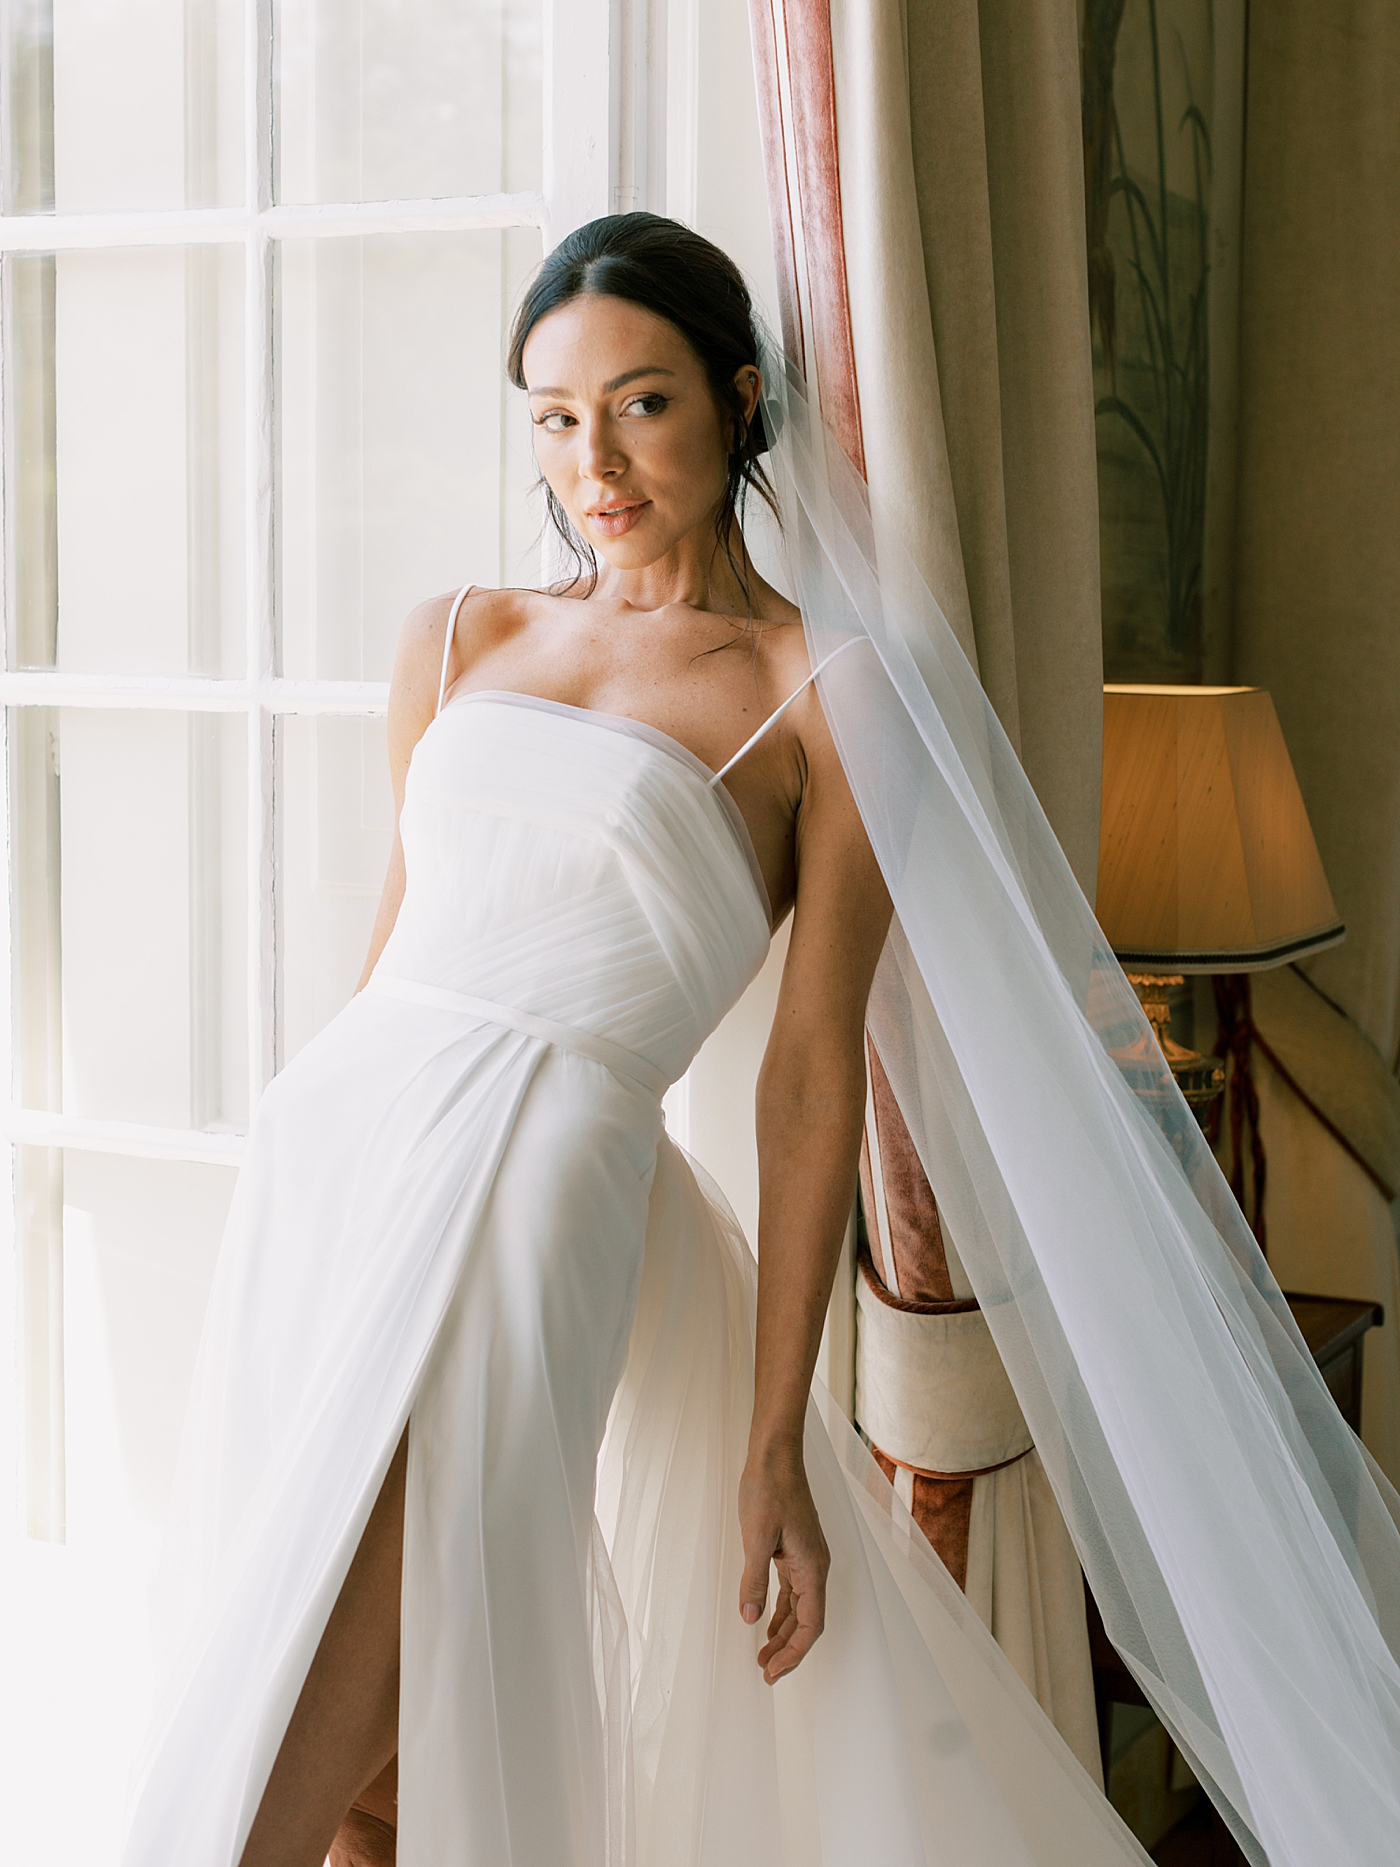 Bride leaning in a doorway | Image by Diane Sotero Photography